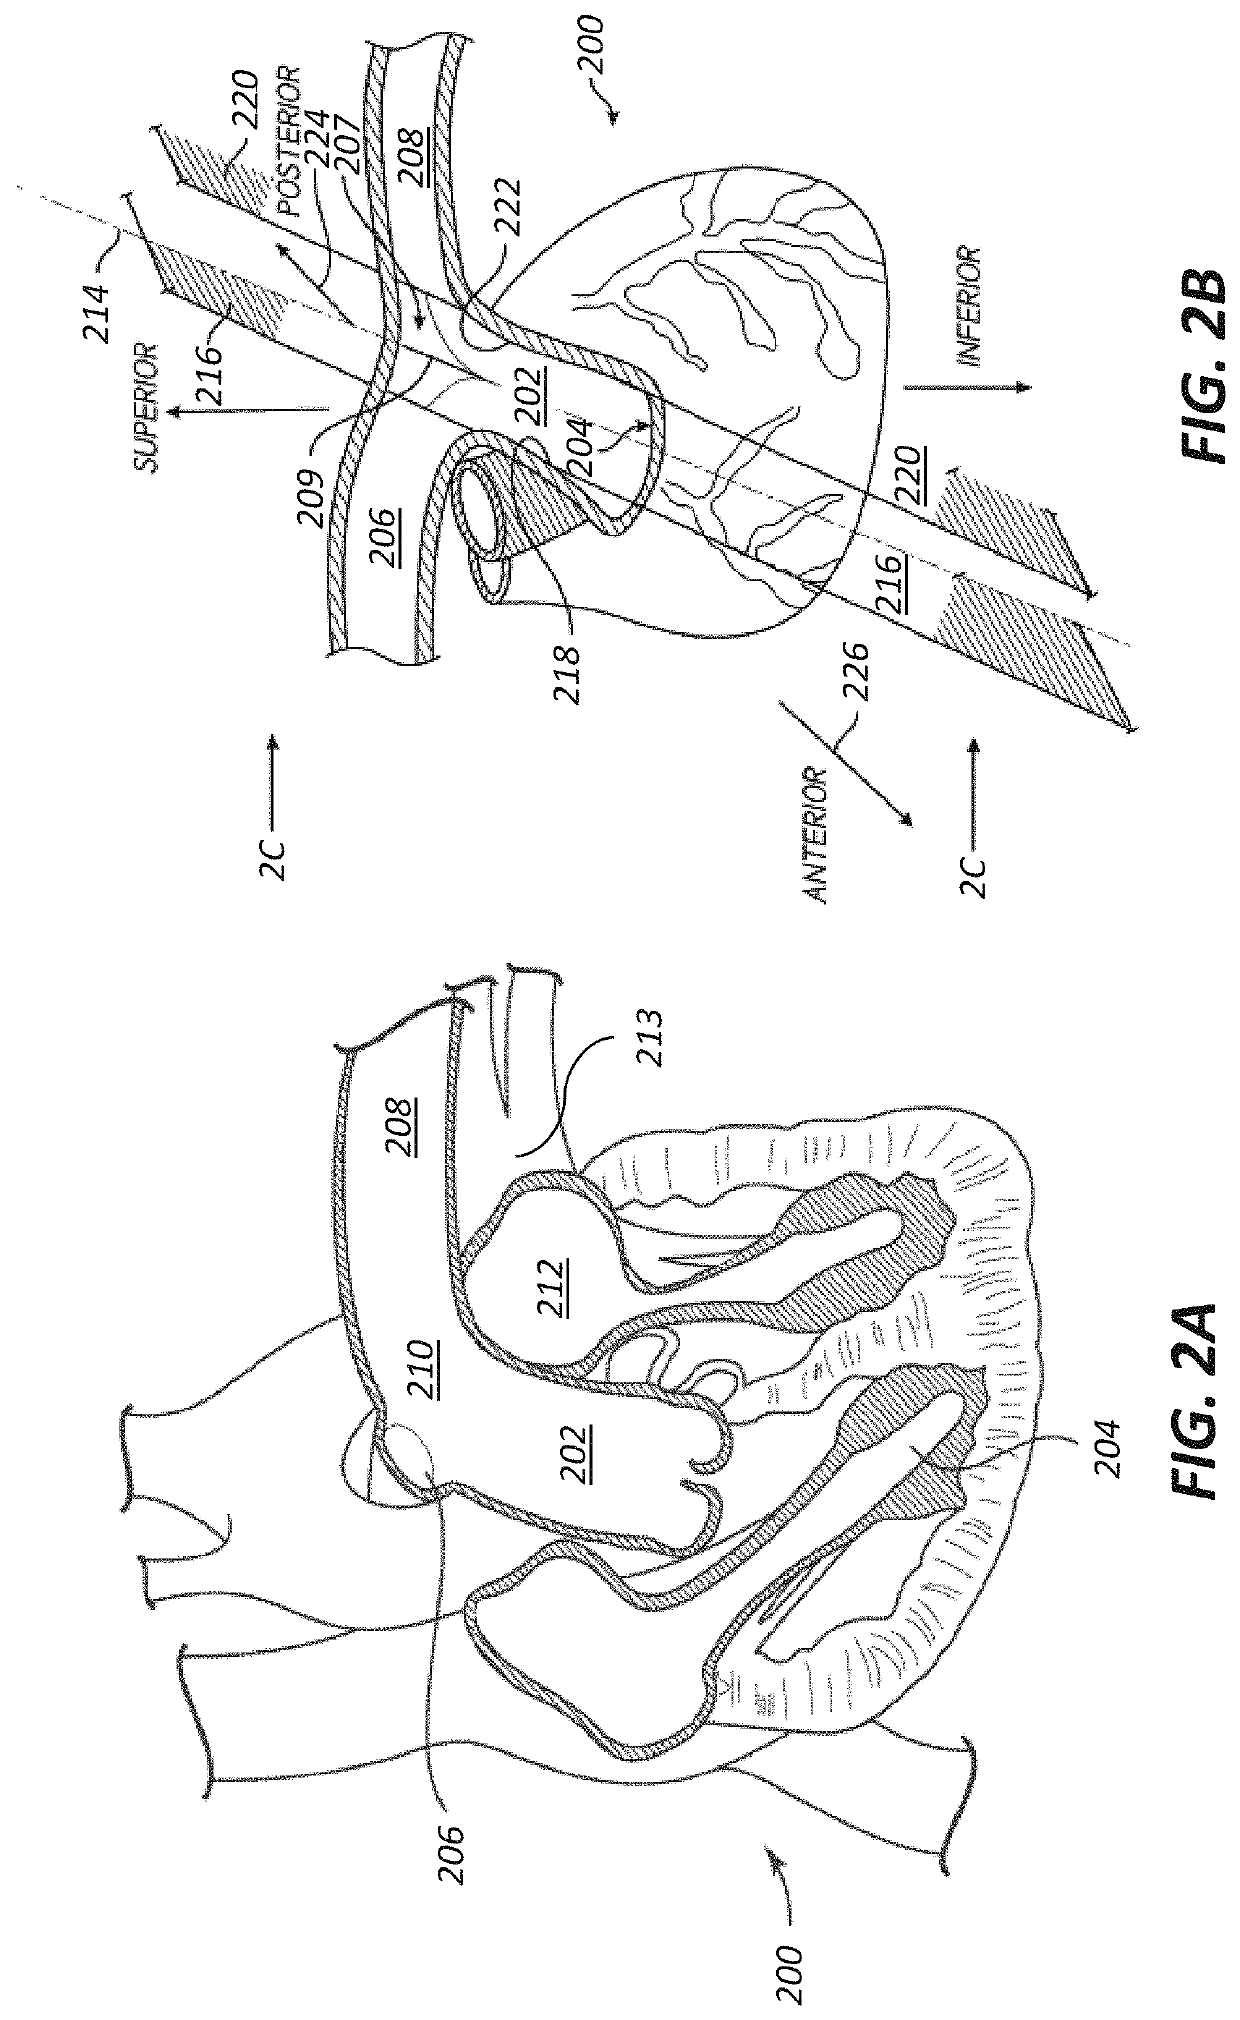 Neurostimulation systems and methods for affecting cardiac contractility